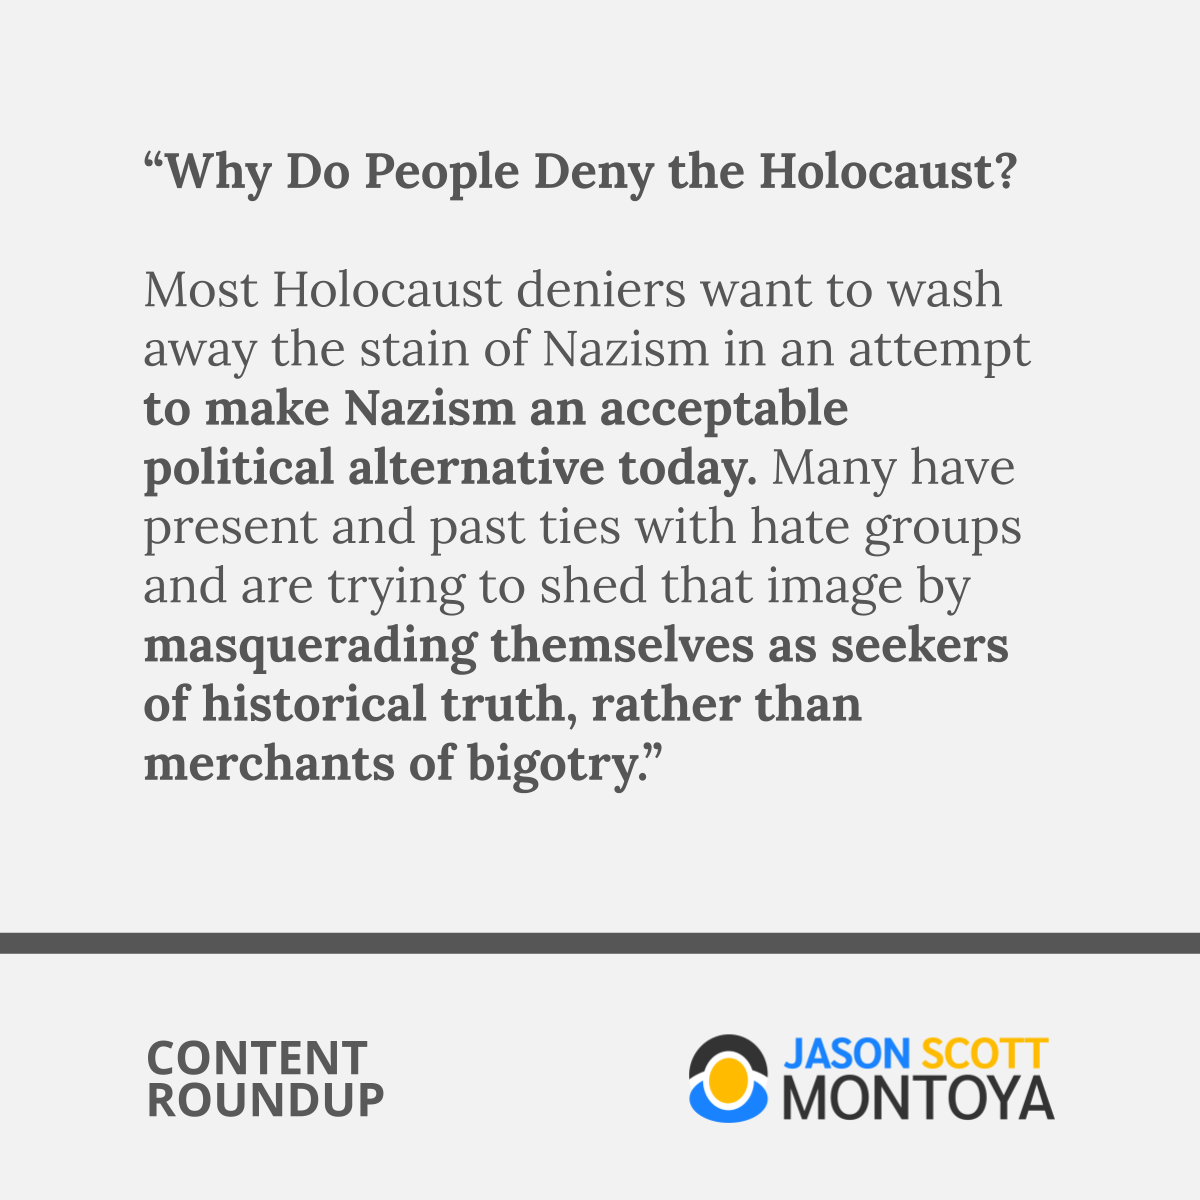 “Why Do People Deny the Holocaust?  Most Holocaust deniers want to wash away the stain of Nazism in an attempt to make Nazism an acceptable political alternative today. Many have present and past ties with hate groups and are trying to shed that image by masquerading themselves as seekers of historical truth, rather than merchants of bigotry.”